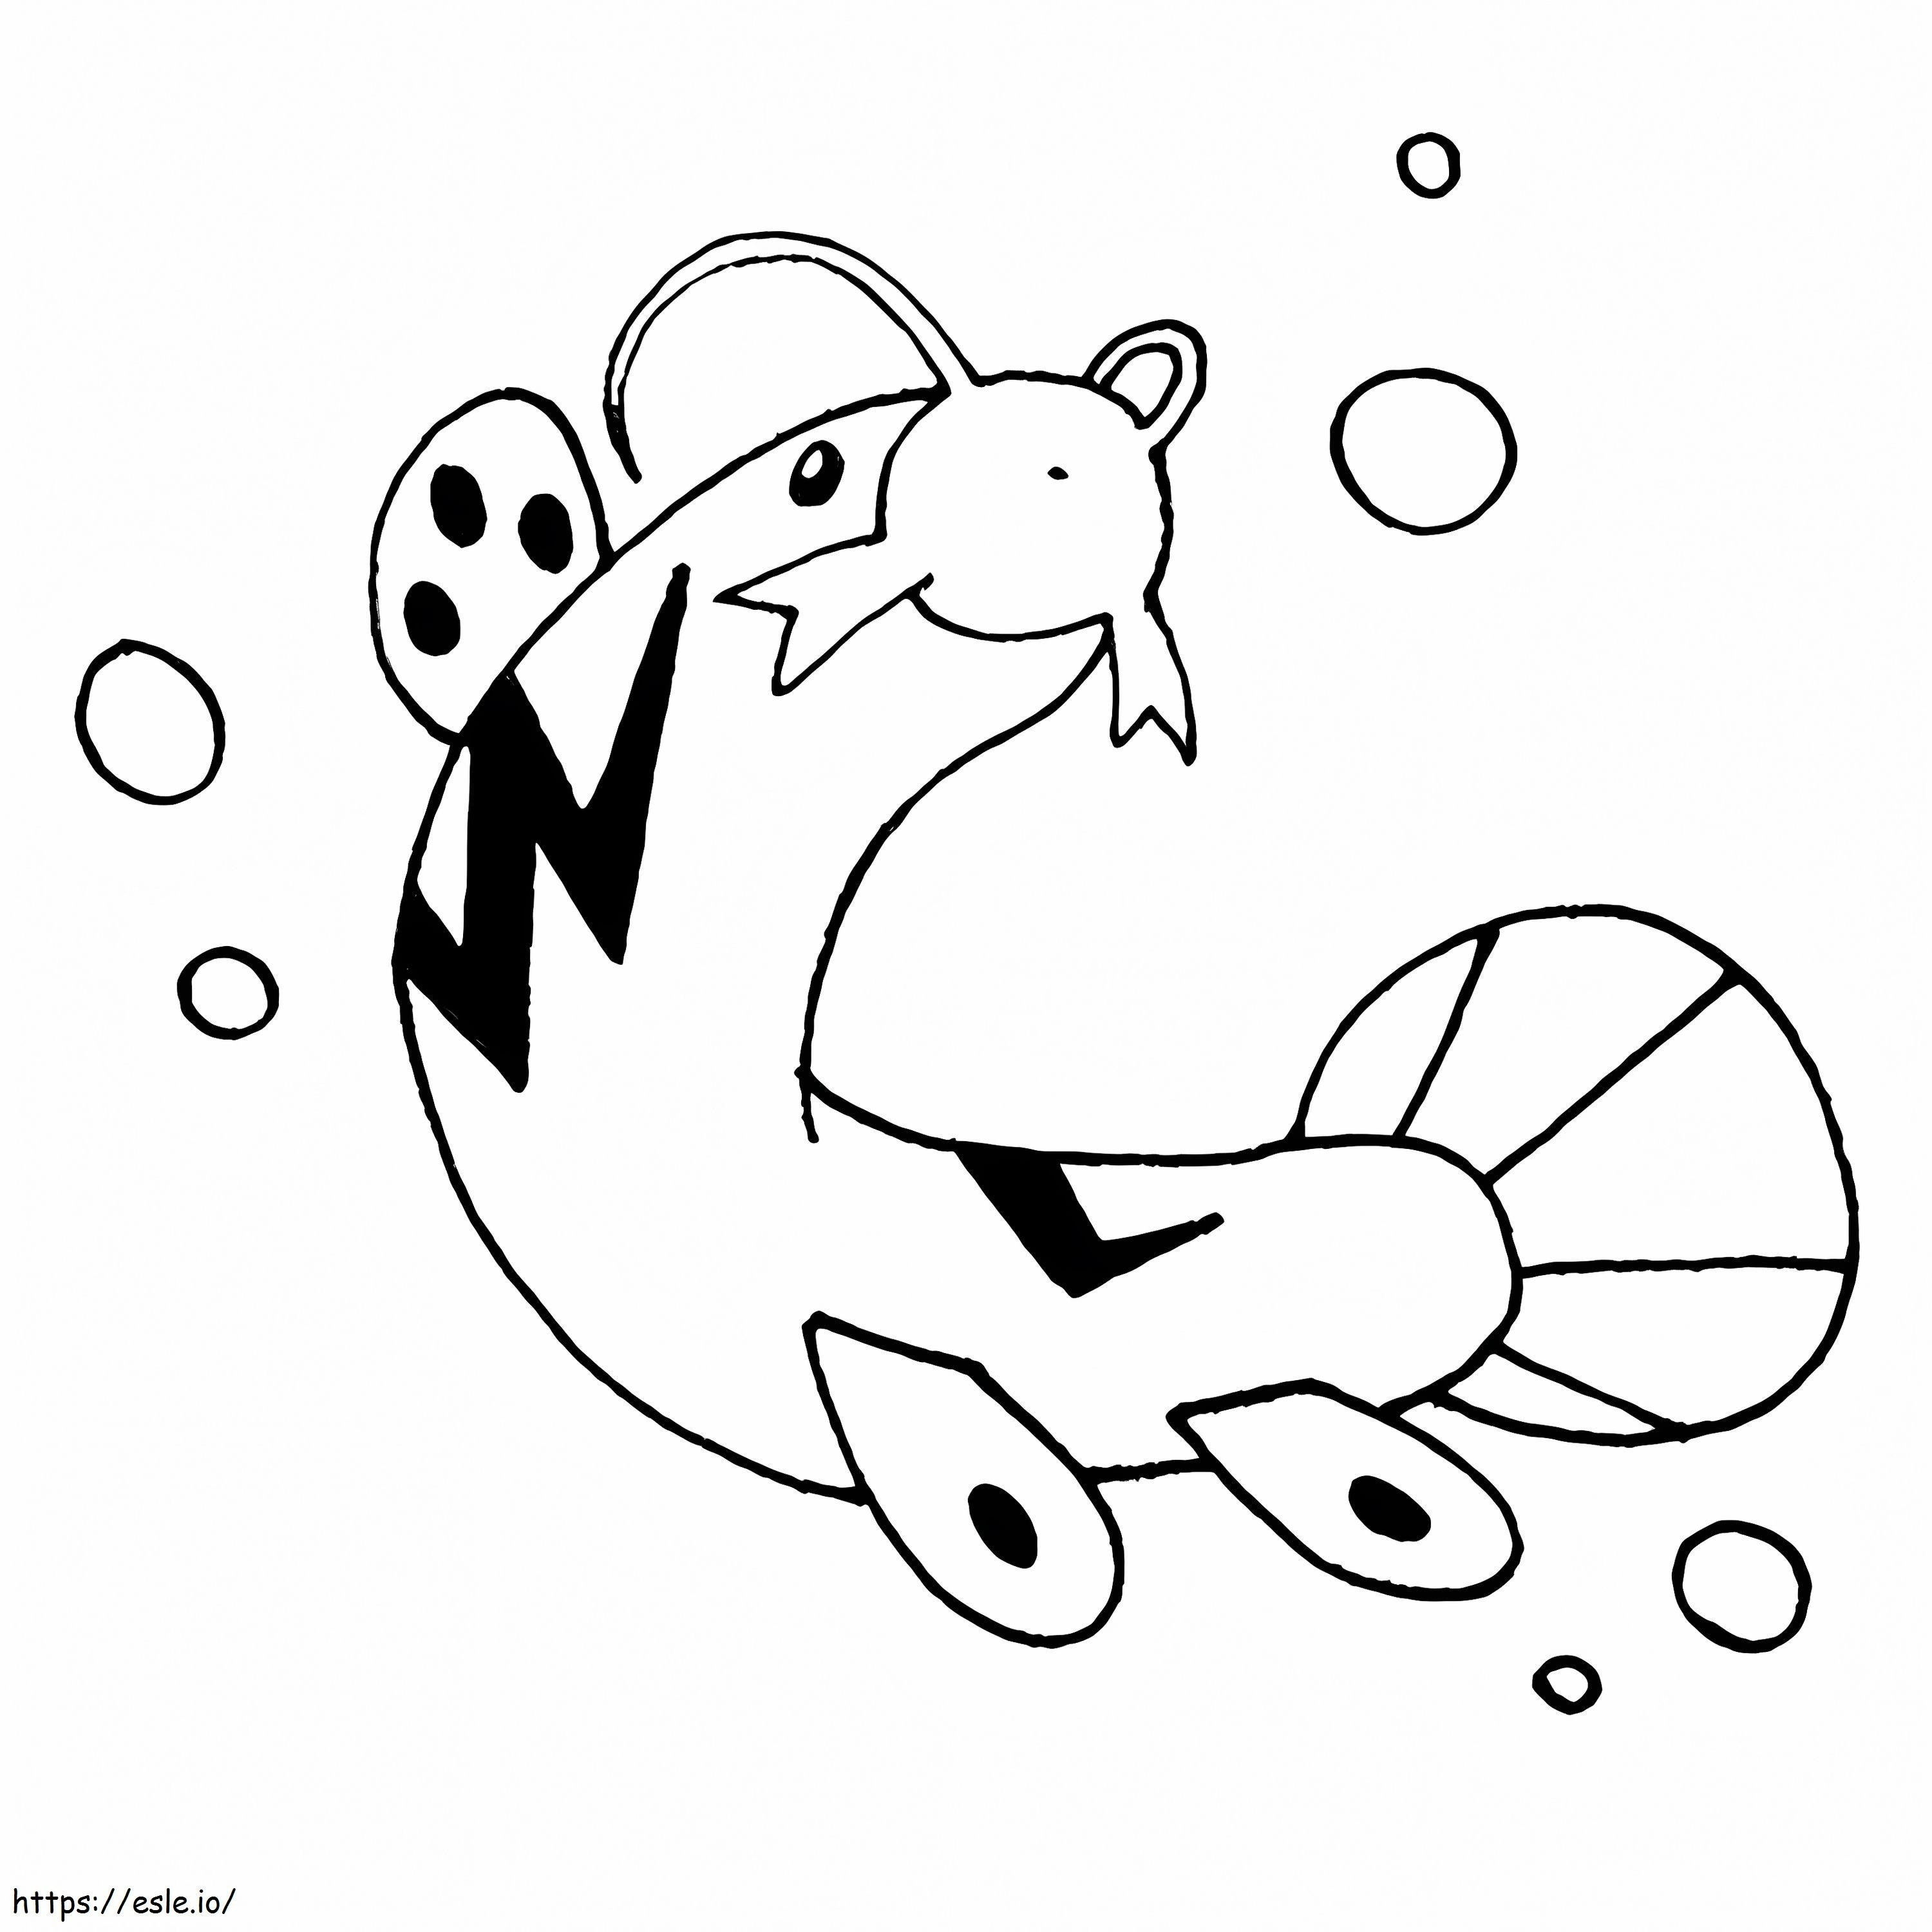 Barboach Pokemon 1 coloring page